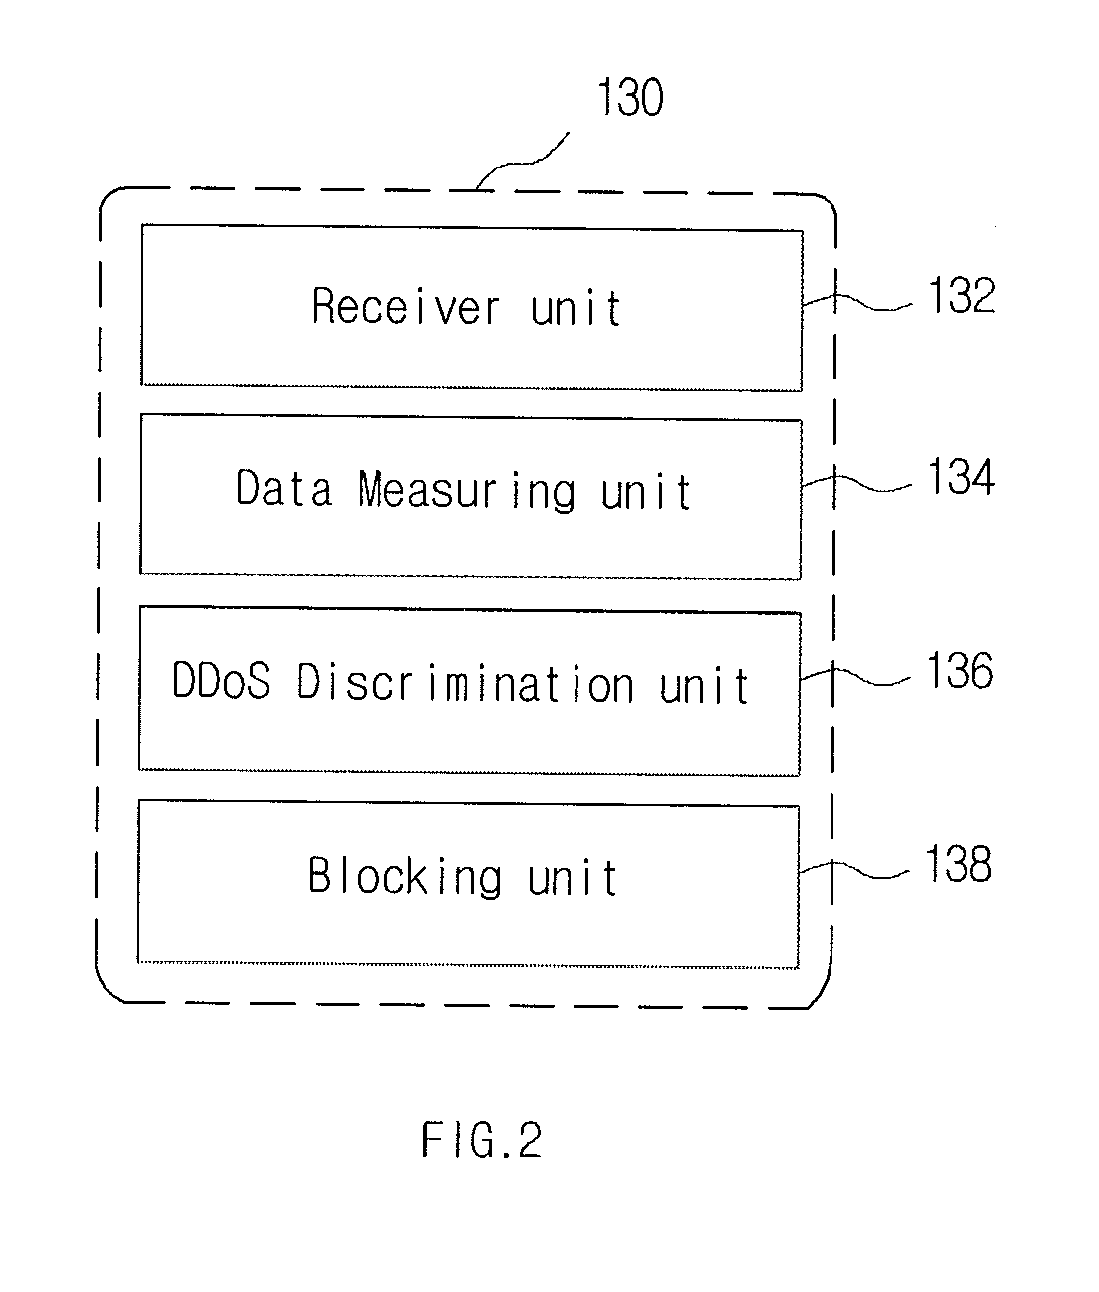 Apparatus for detecting and filtering ddos attack based on request uri type